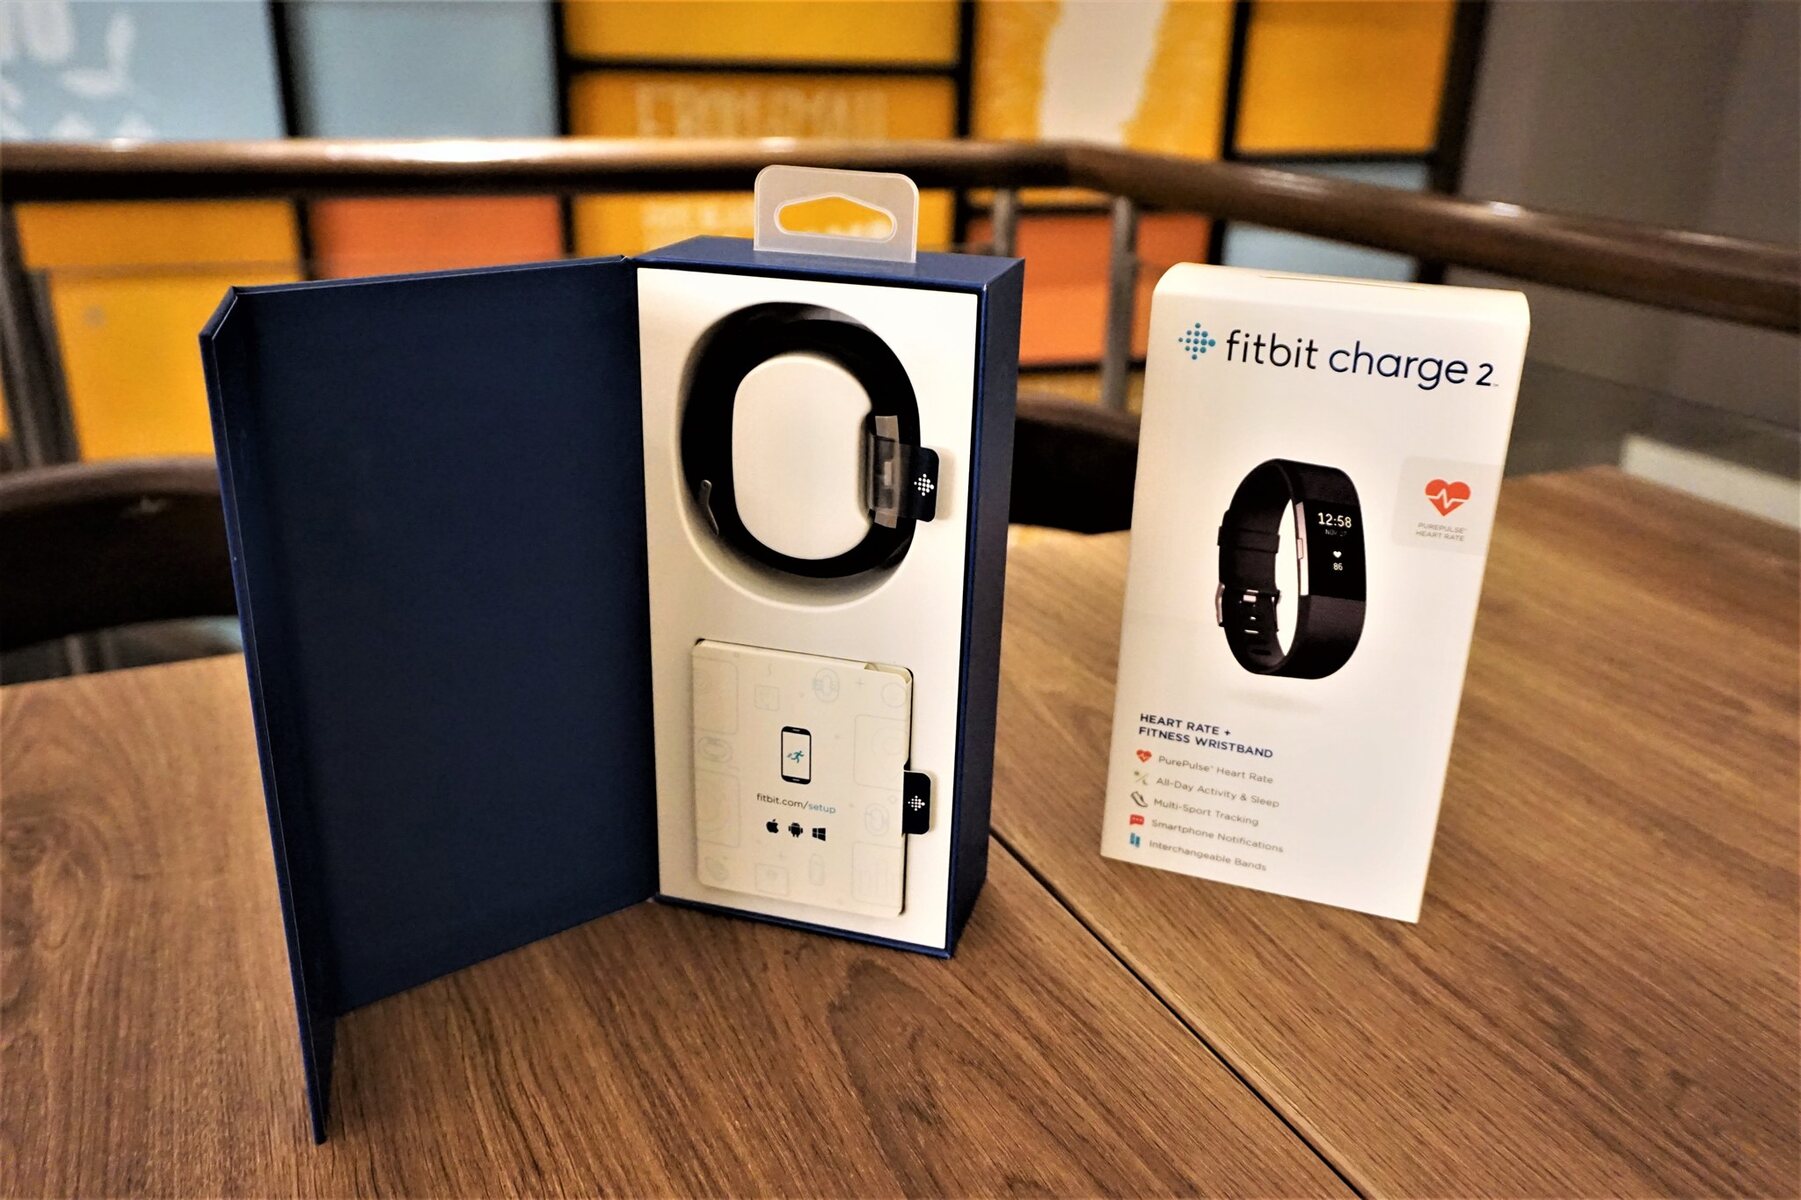 unboxing-fitbit-a-look-at-what-comes-with-the-charge-2